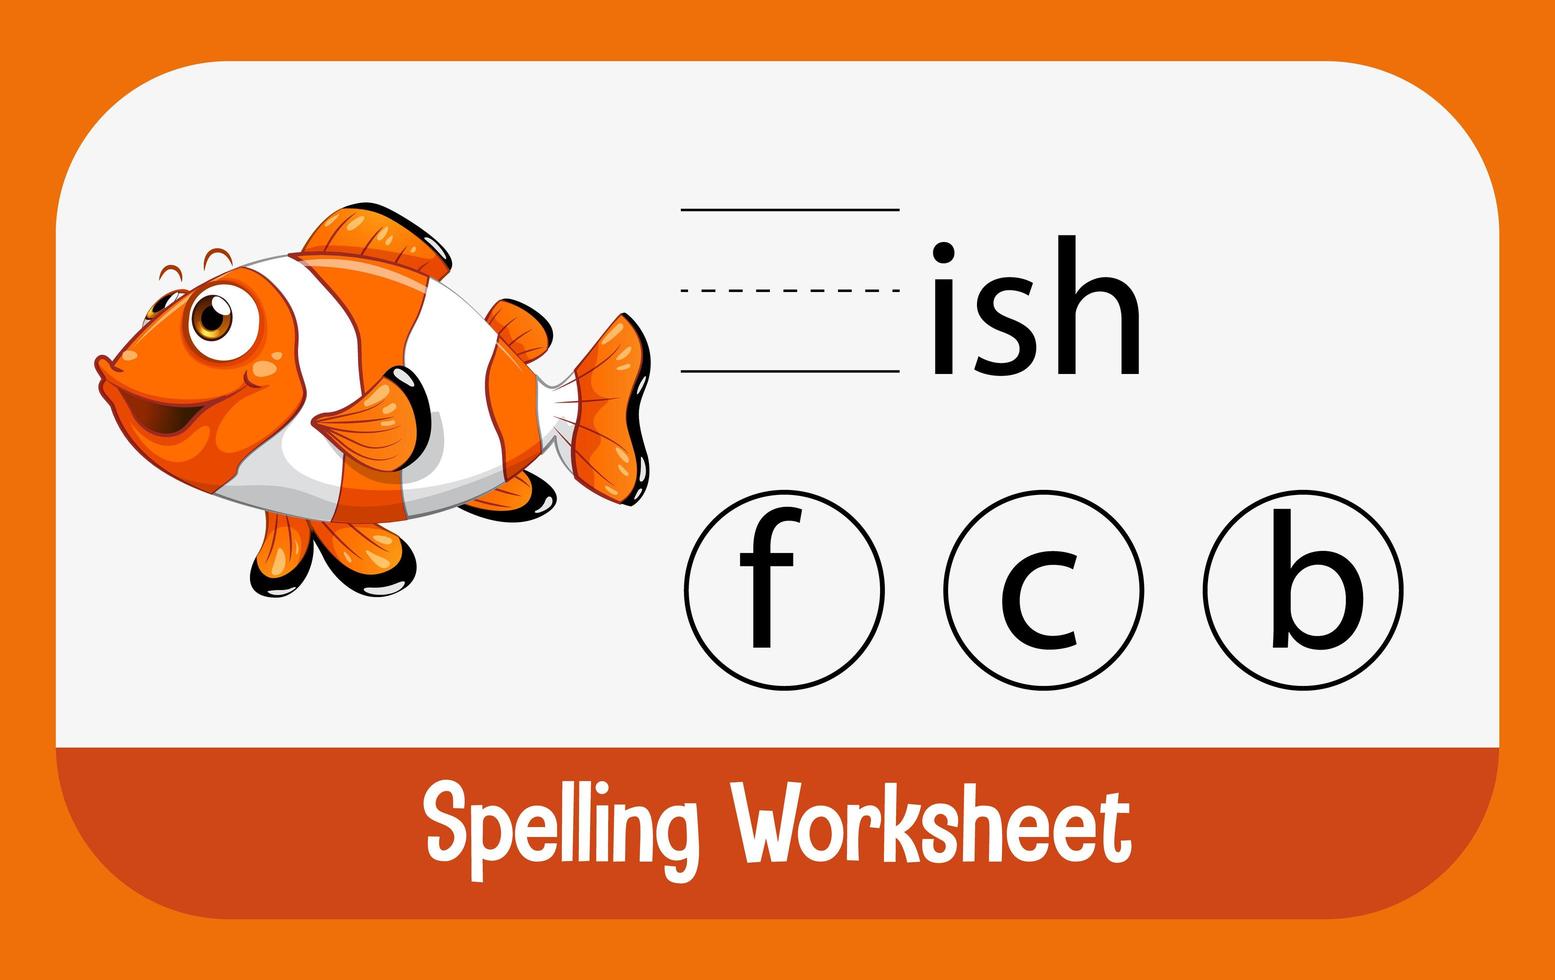 Find missing letter with fish vector